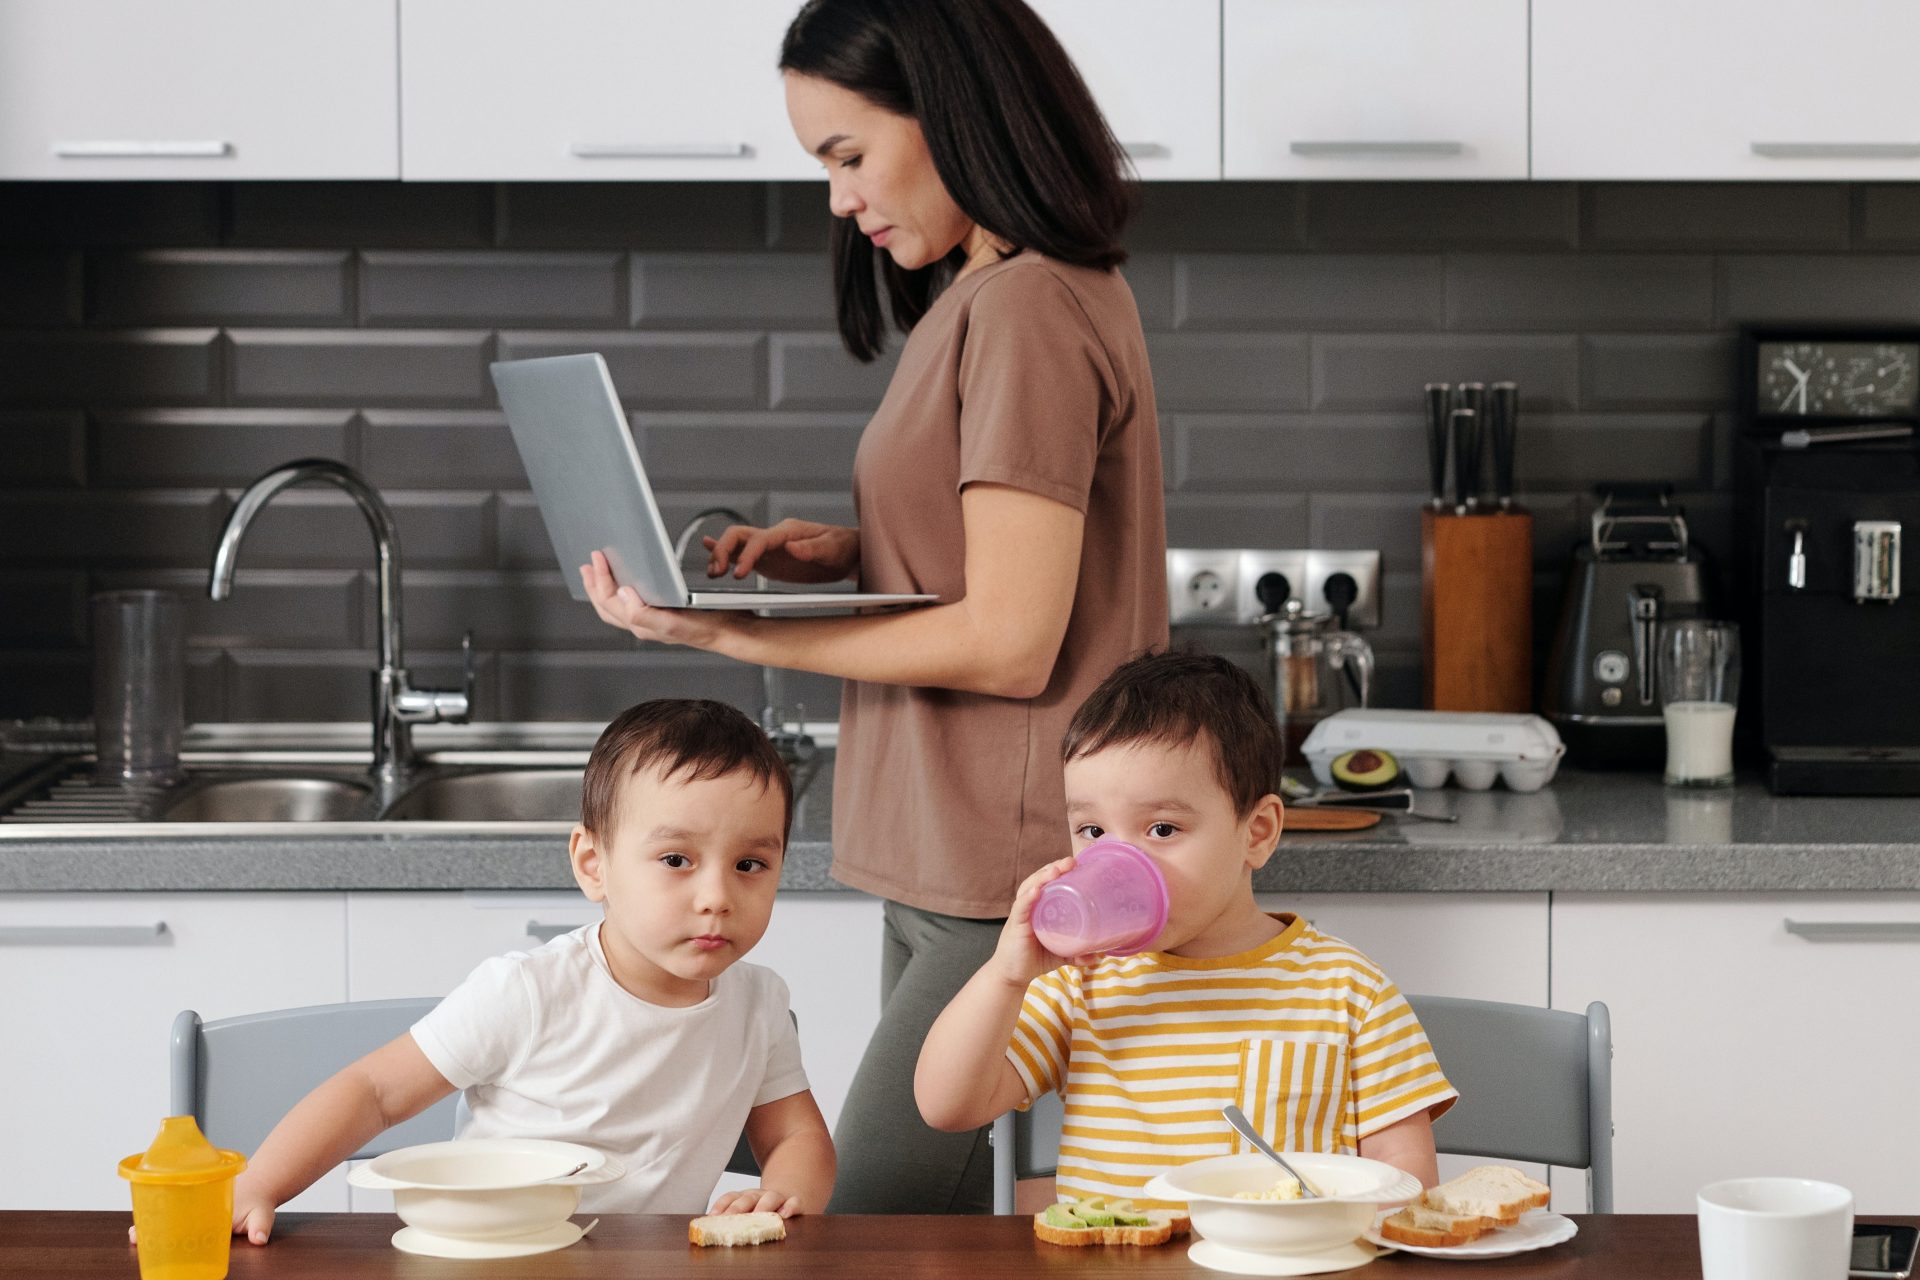 a women working on a laptop behind two children eating at a kitchen table